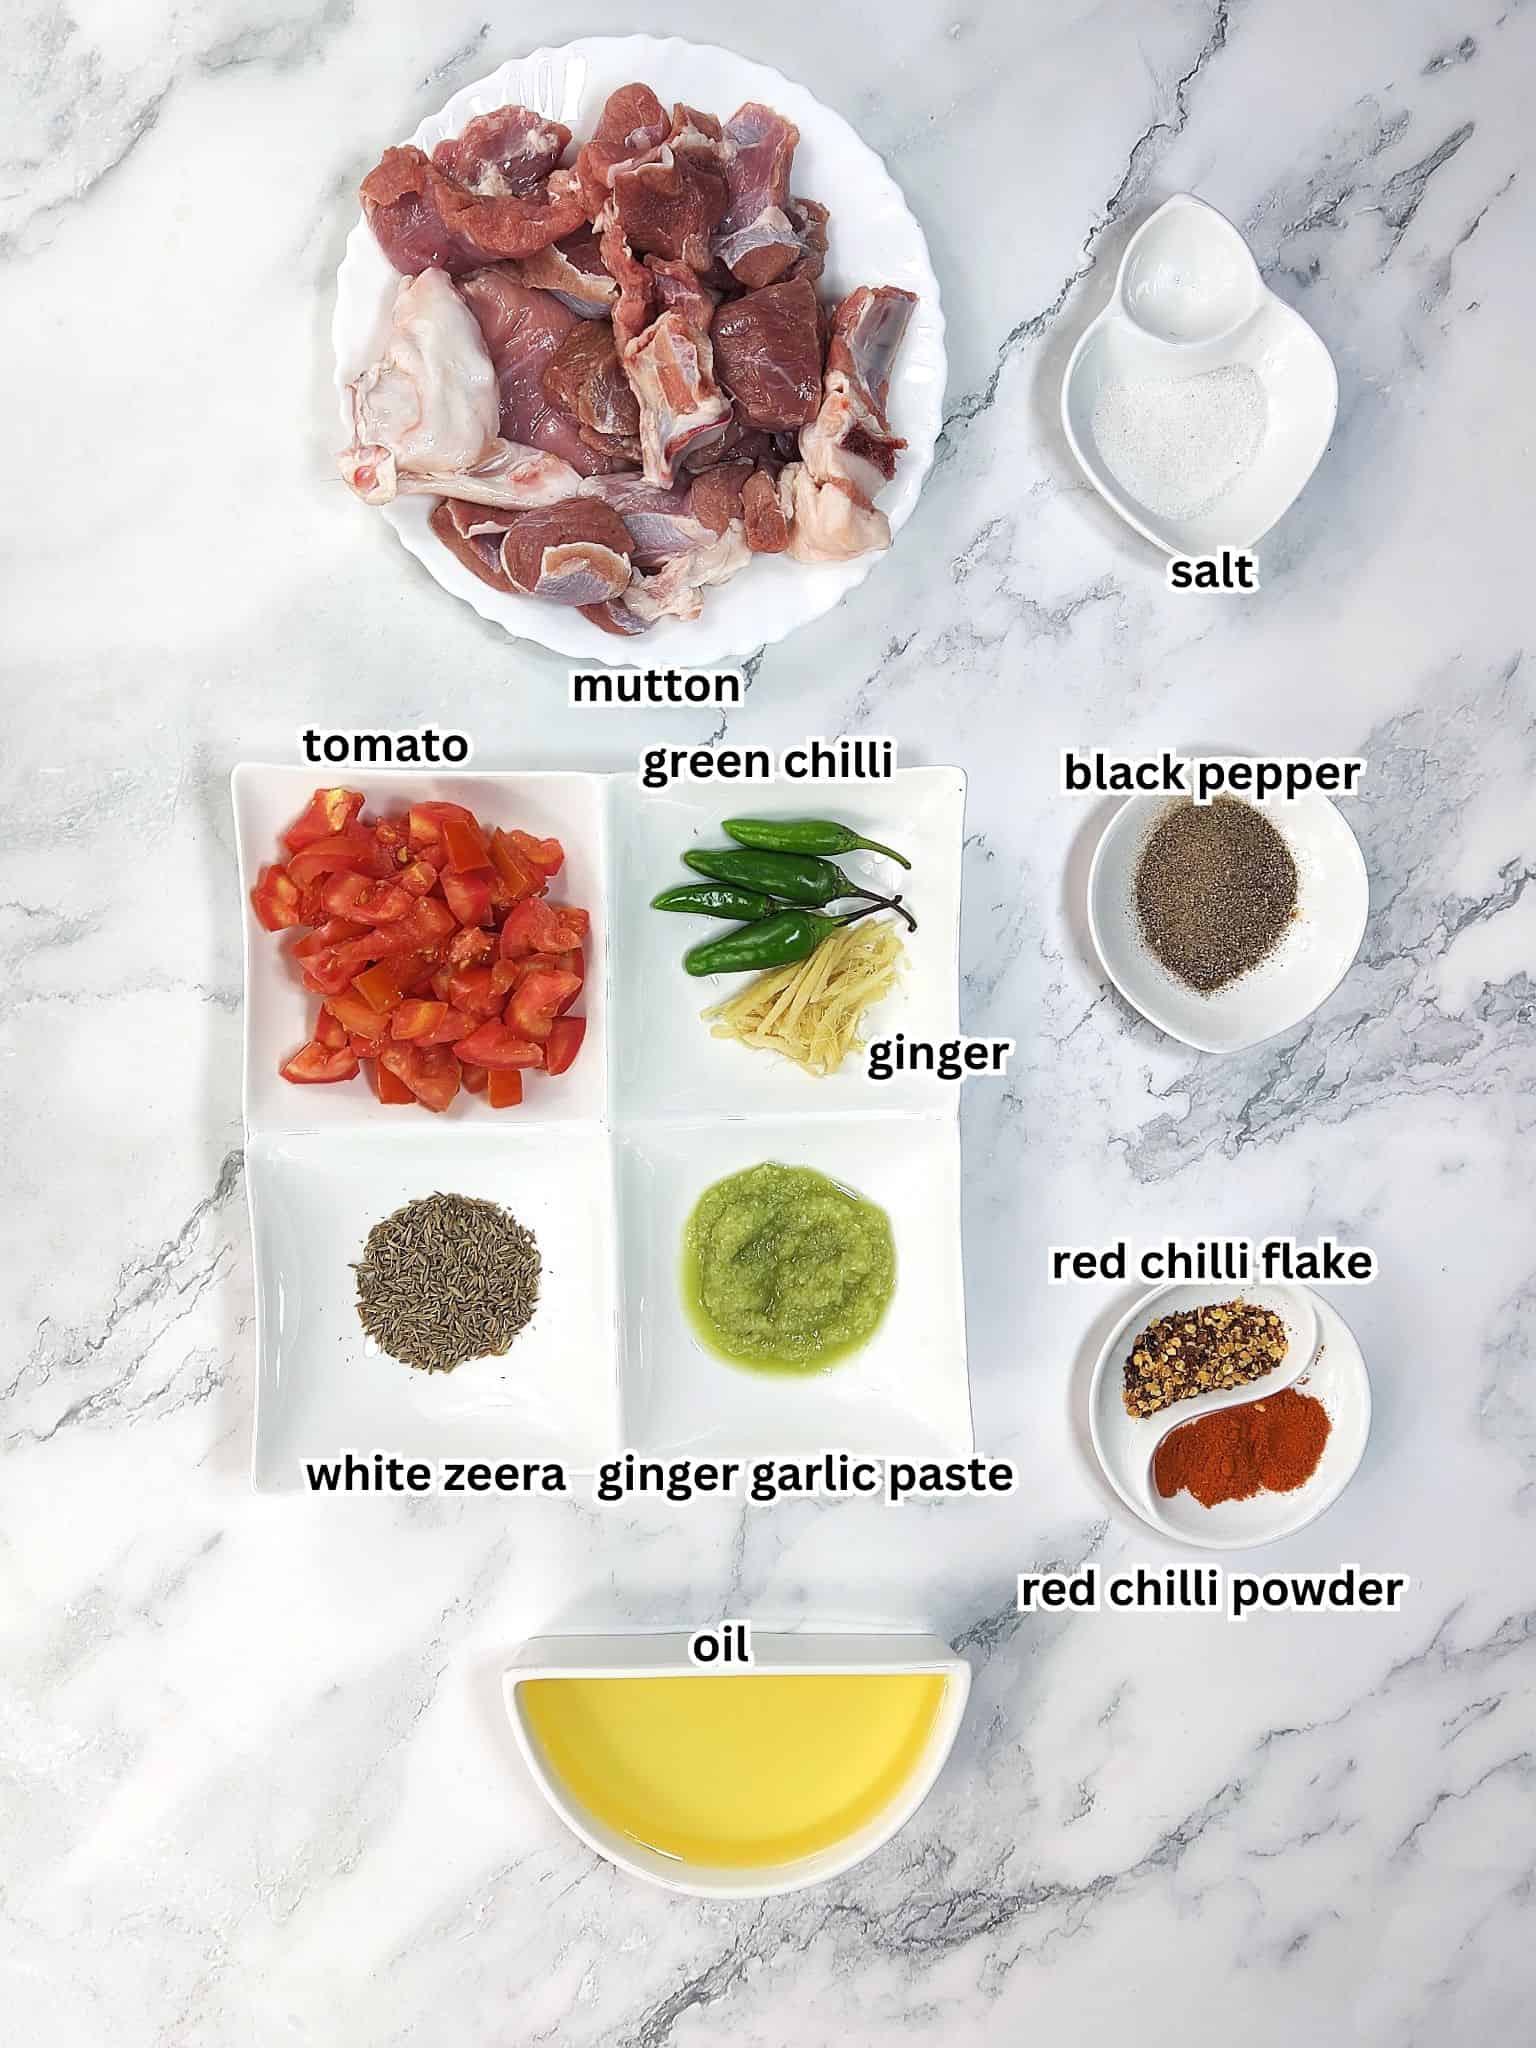 ingredients of mutton karahi shown with labels